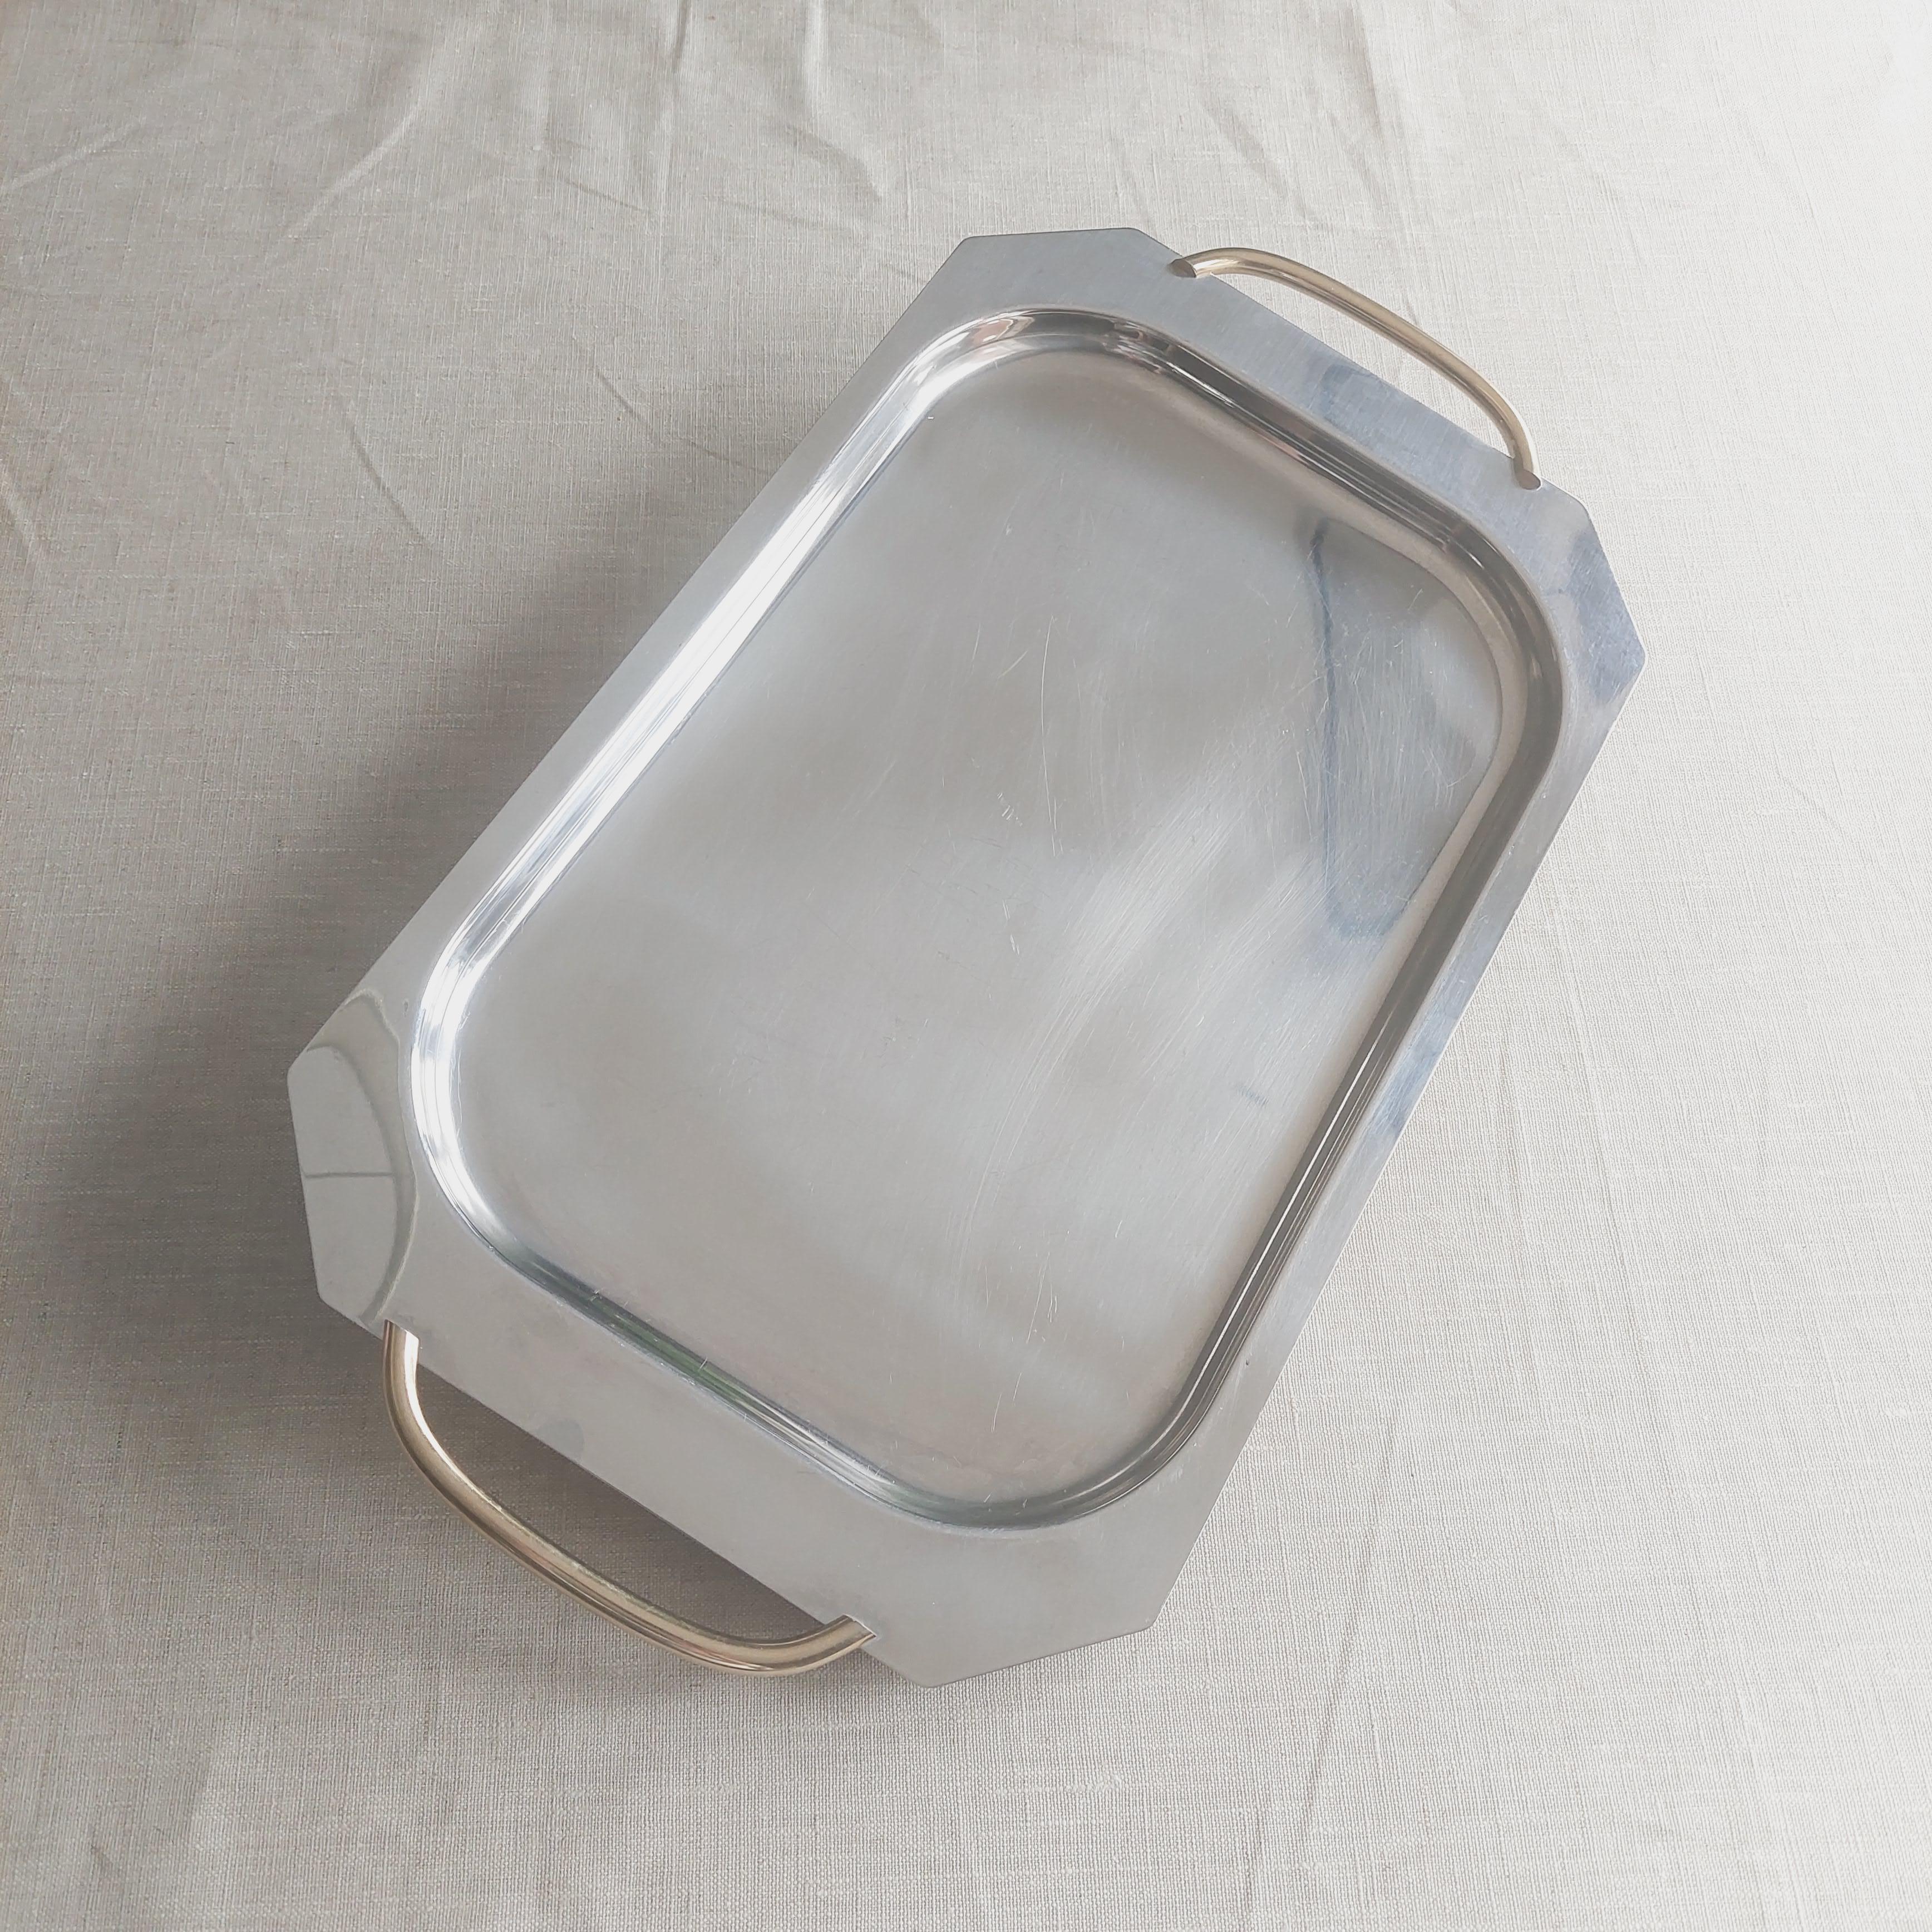 Rectangular Stainles Steel Centerpiece Serving Tray, Inox 18/10 Tsl, Italy, 1970 For Sale 2